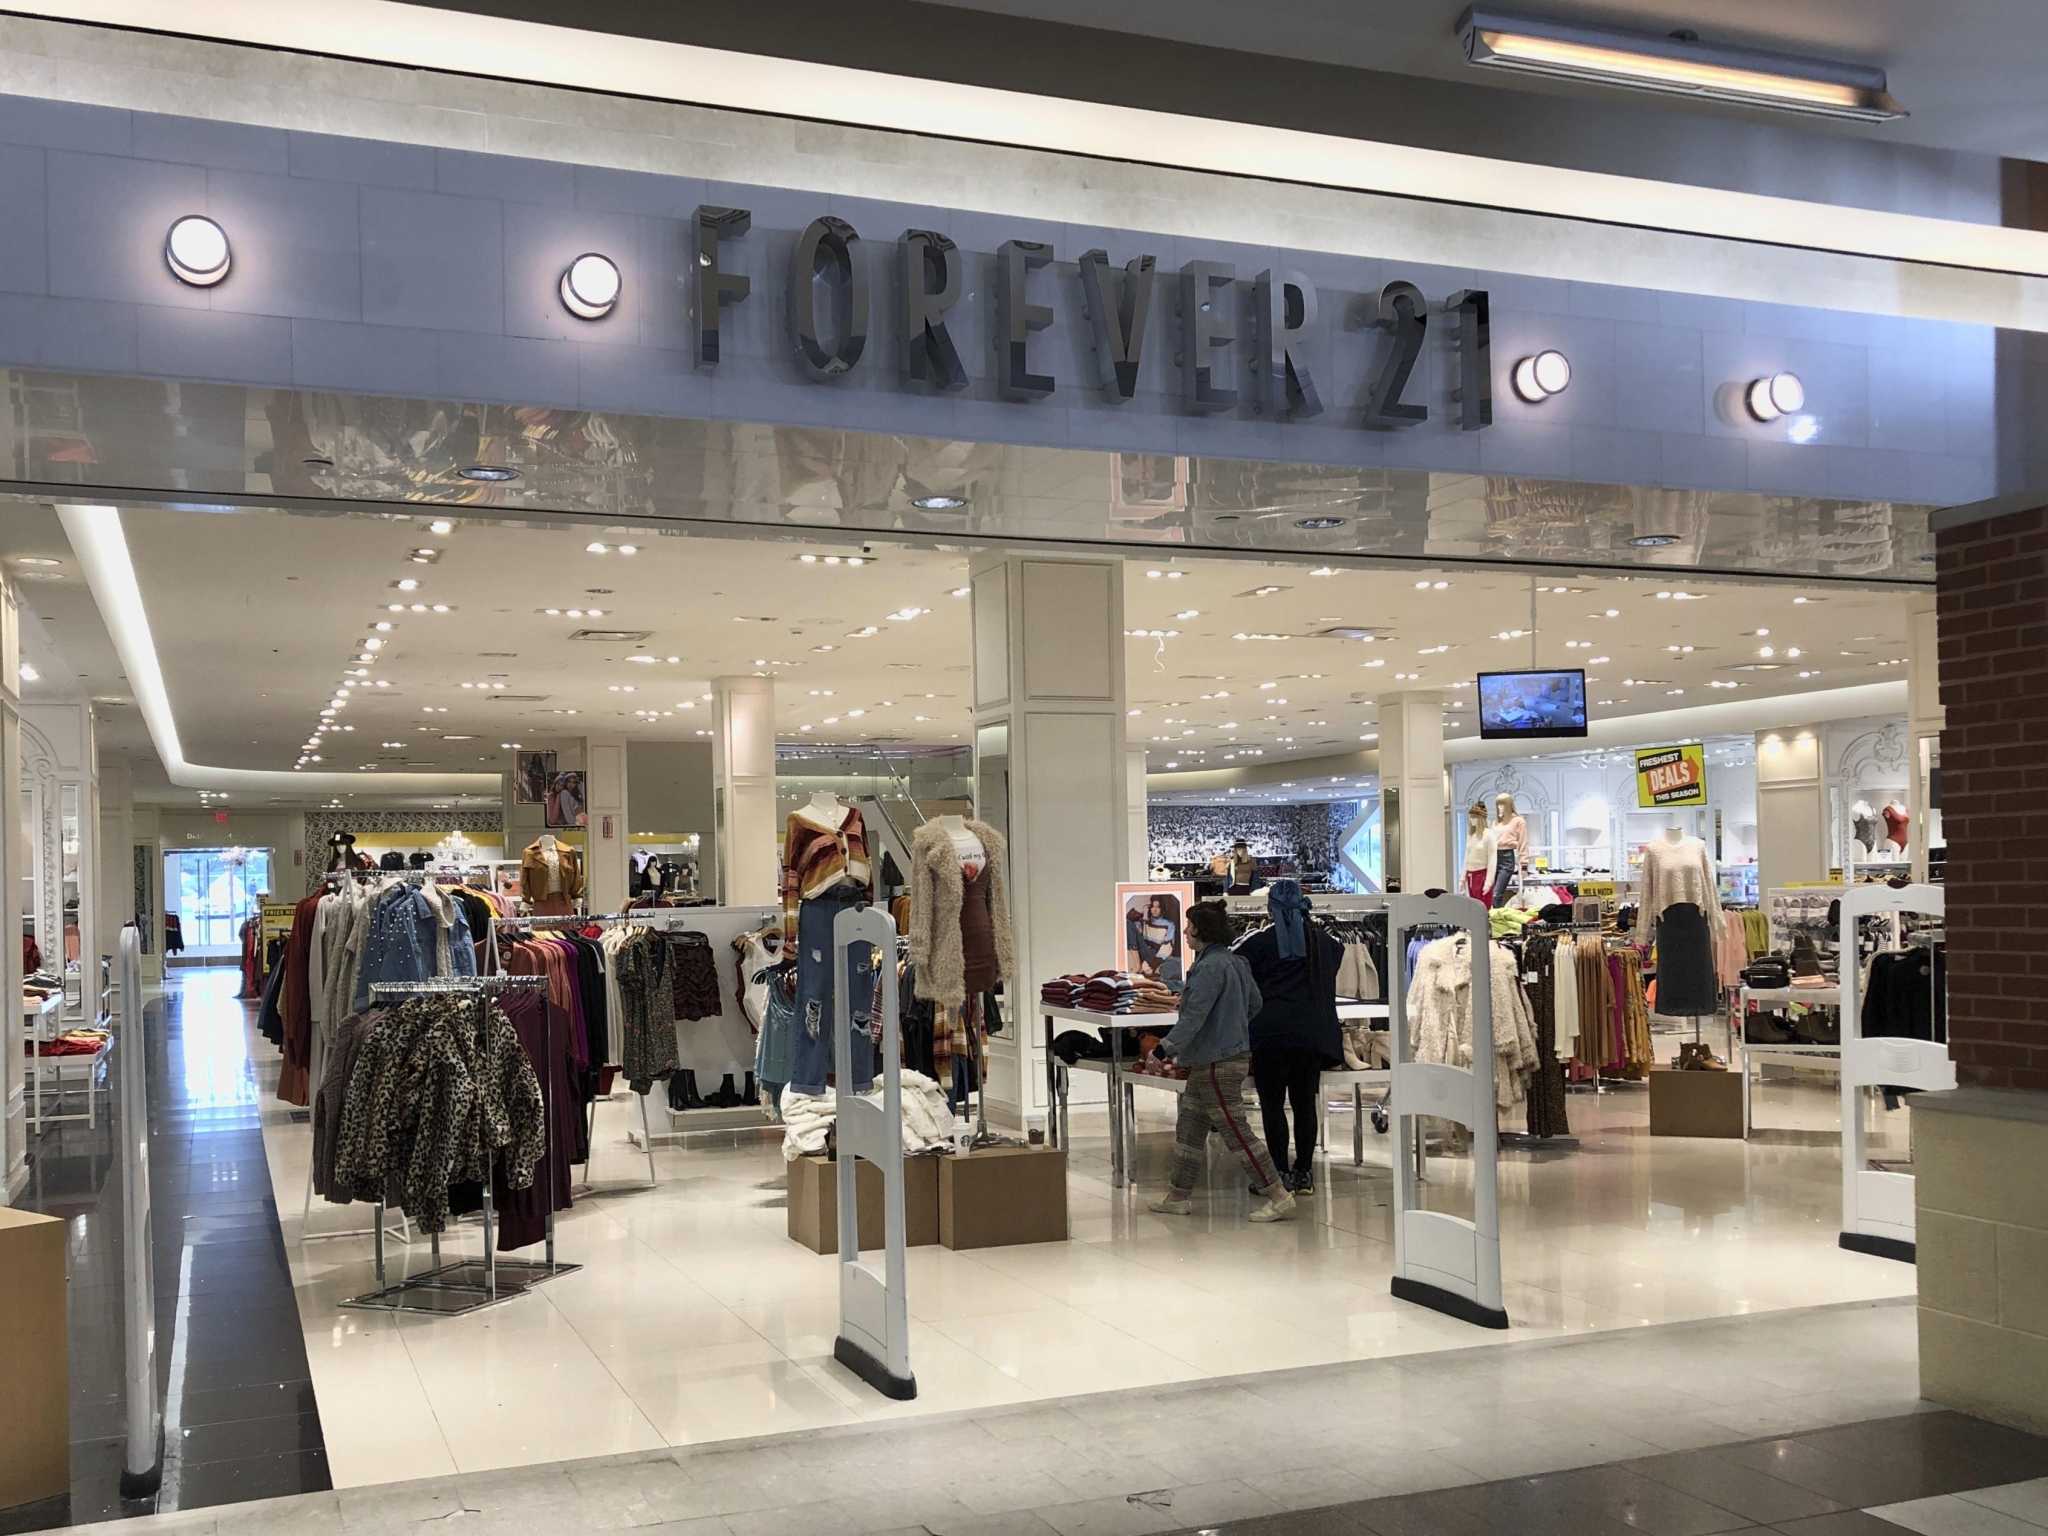 Forever 21 to open 'first large format' store in Grand Rapids